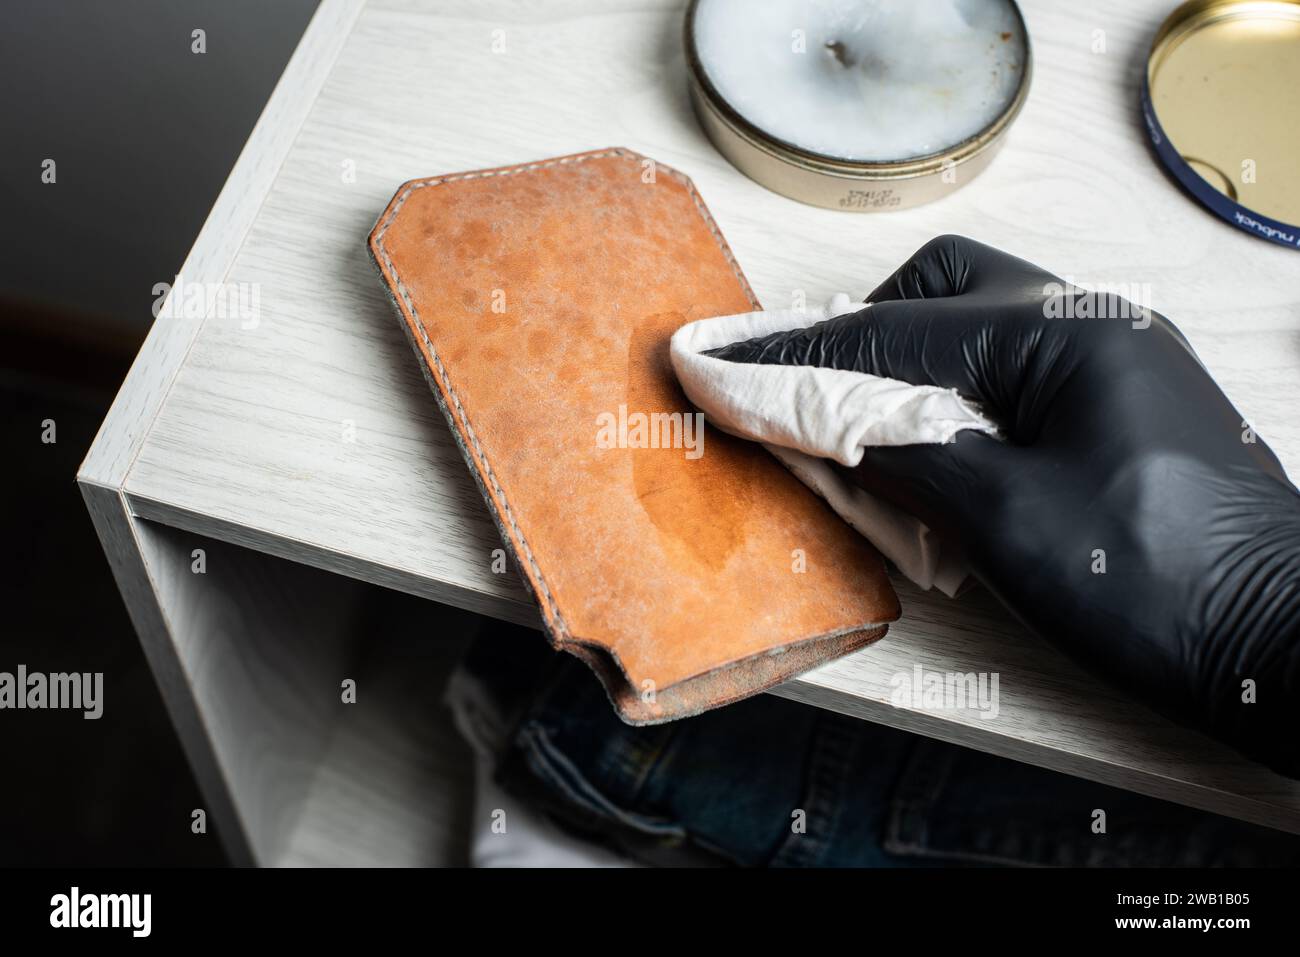 The man cleaning mould on leather product. Leather care concept. Stock Photo